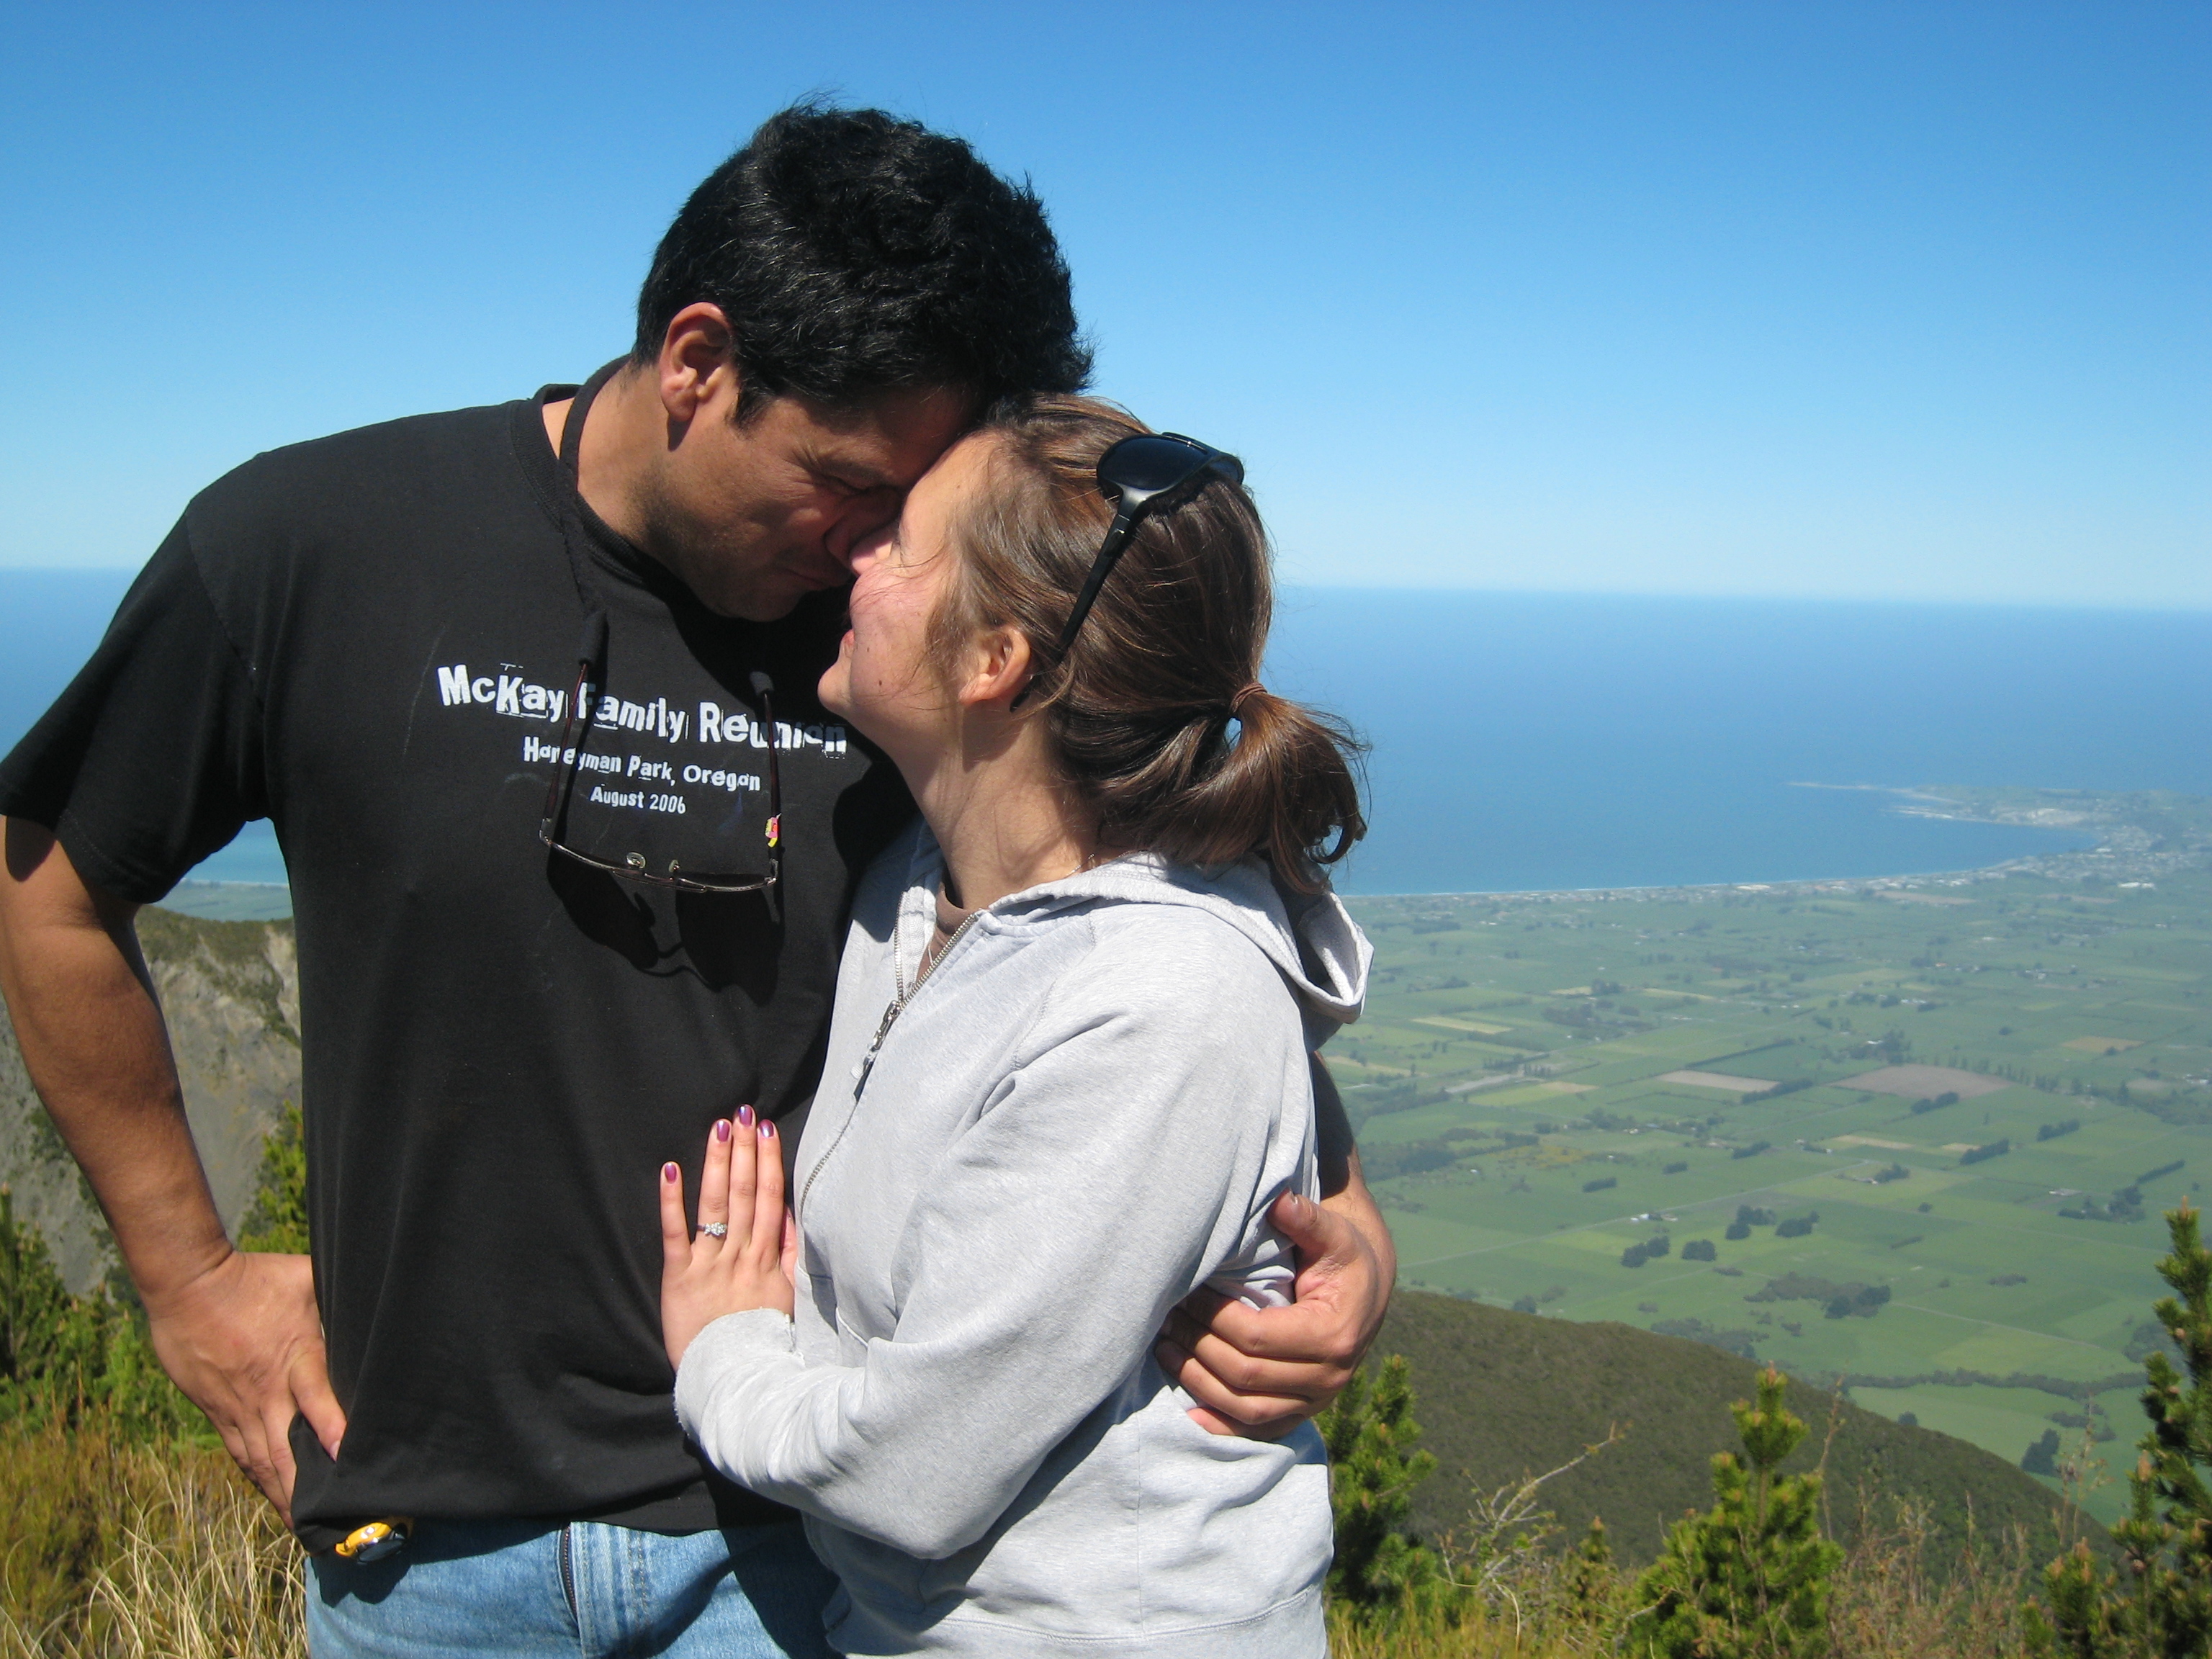 A man in a black shirt and a woman in a grey sweatshirt standing together on a grassy hill.